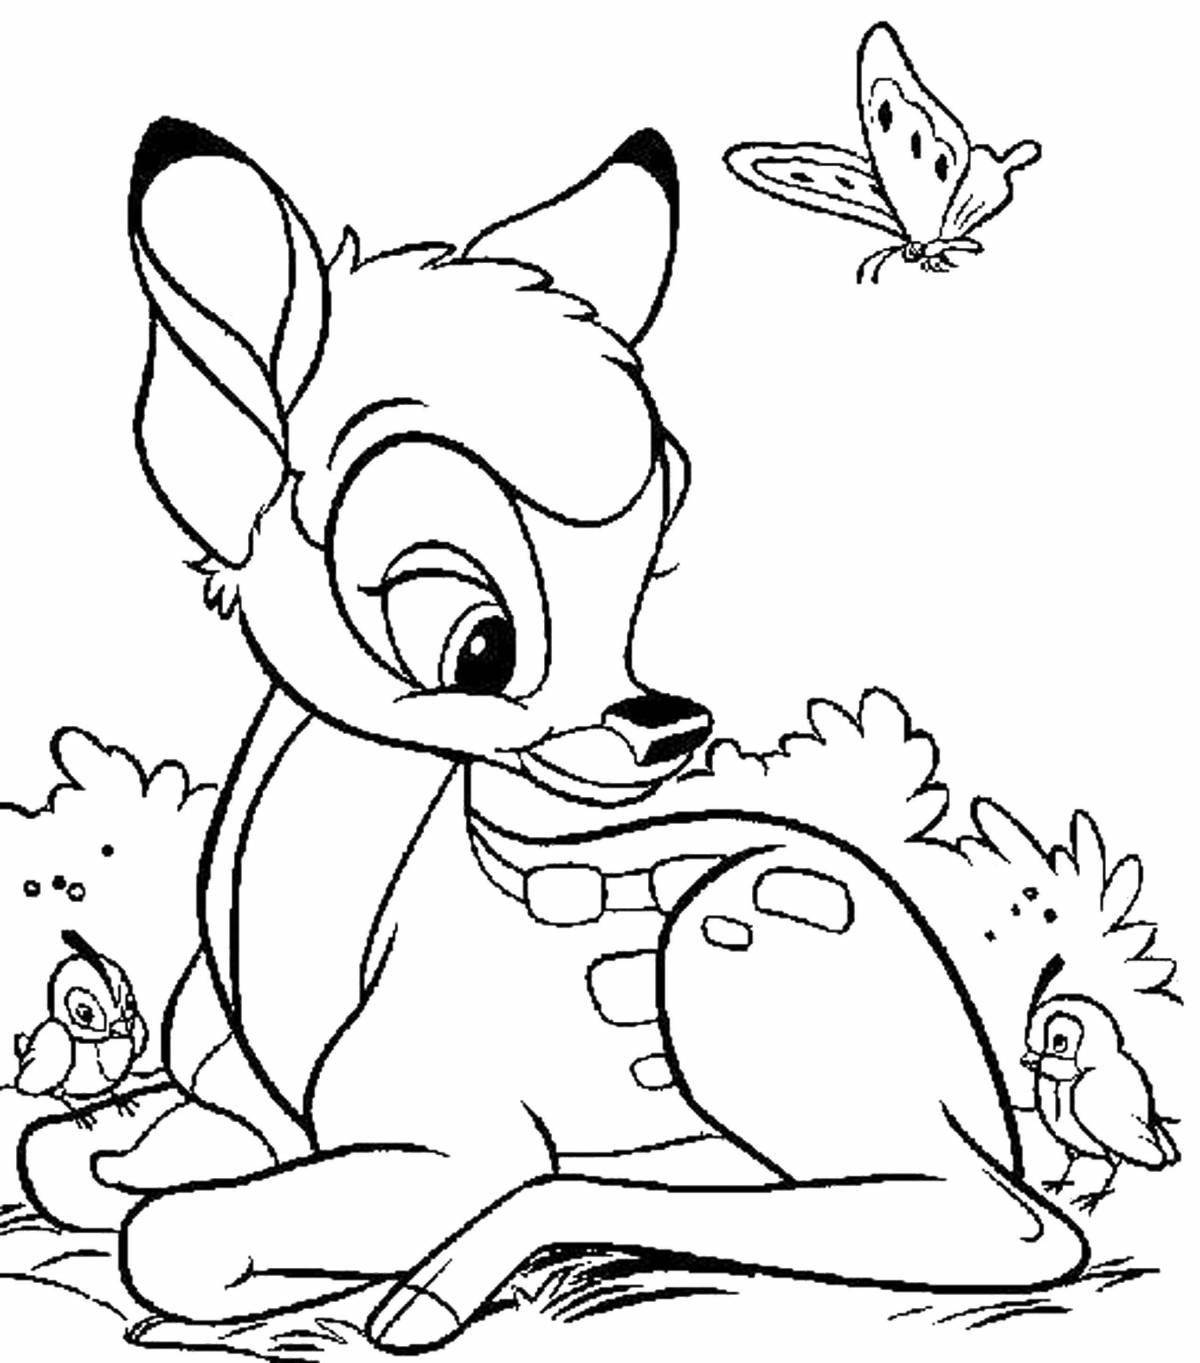 Archive of funny printable coloring pages